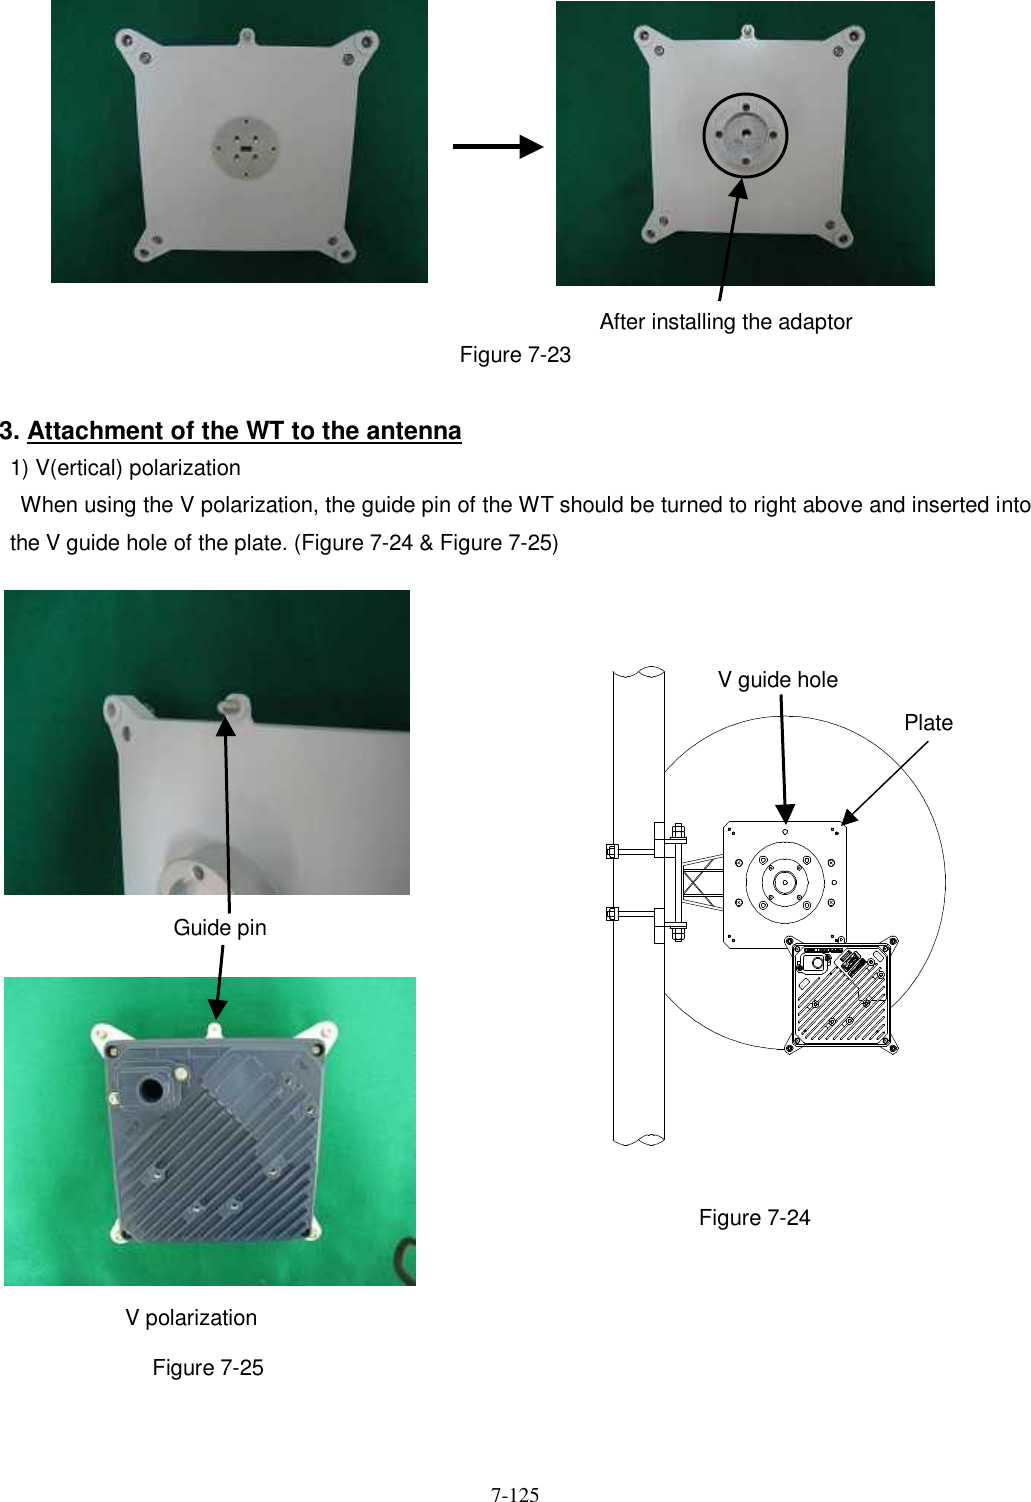   7-125            Figure 7-23  3. Attachment of the WT to the antenna 1) V(ertical) polarization     When using the V polarization, the guide pin of the WT should be turned to right above and inserted into the V guide hole of the plate. (Figure 7-24 &amp; Figure 7-25)                                  Figure 7-24        Figure 7-25   V polarization Guide pin After installing the adaptor V guide hole Plate Ｔ ＯＰＶＴＯＰ ＨＥＴＨＥＲ